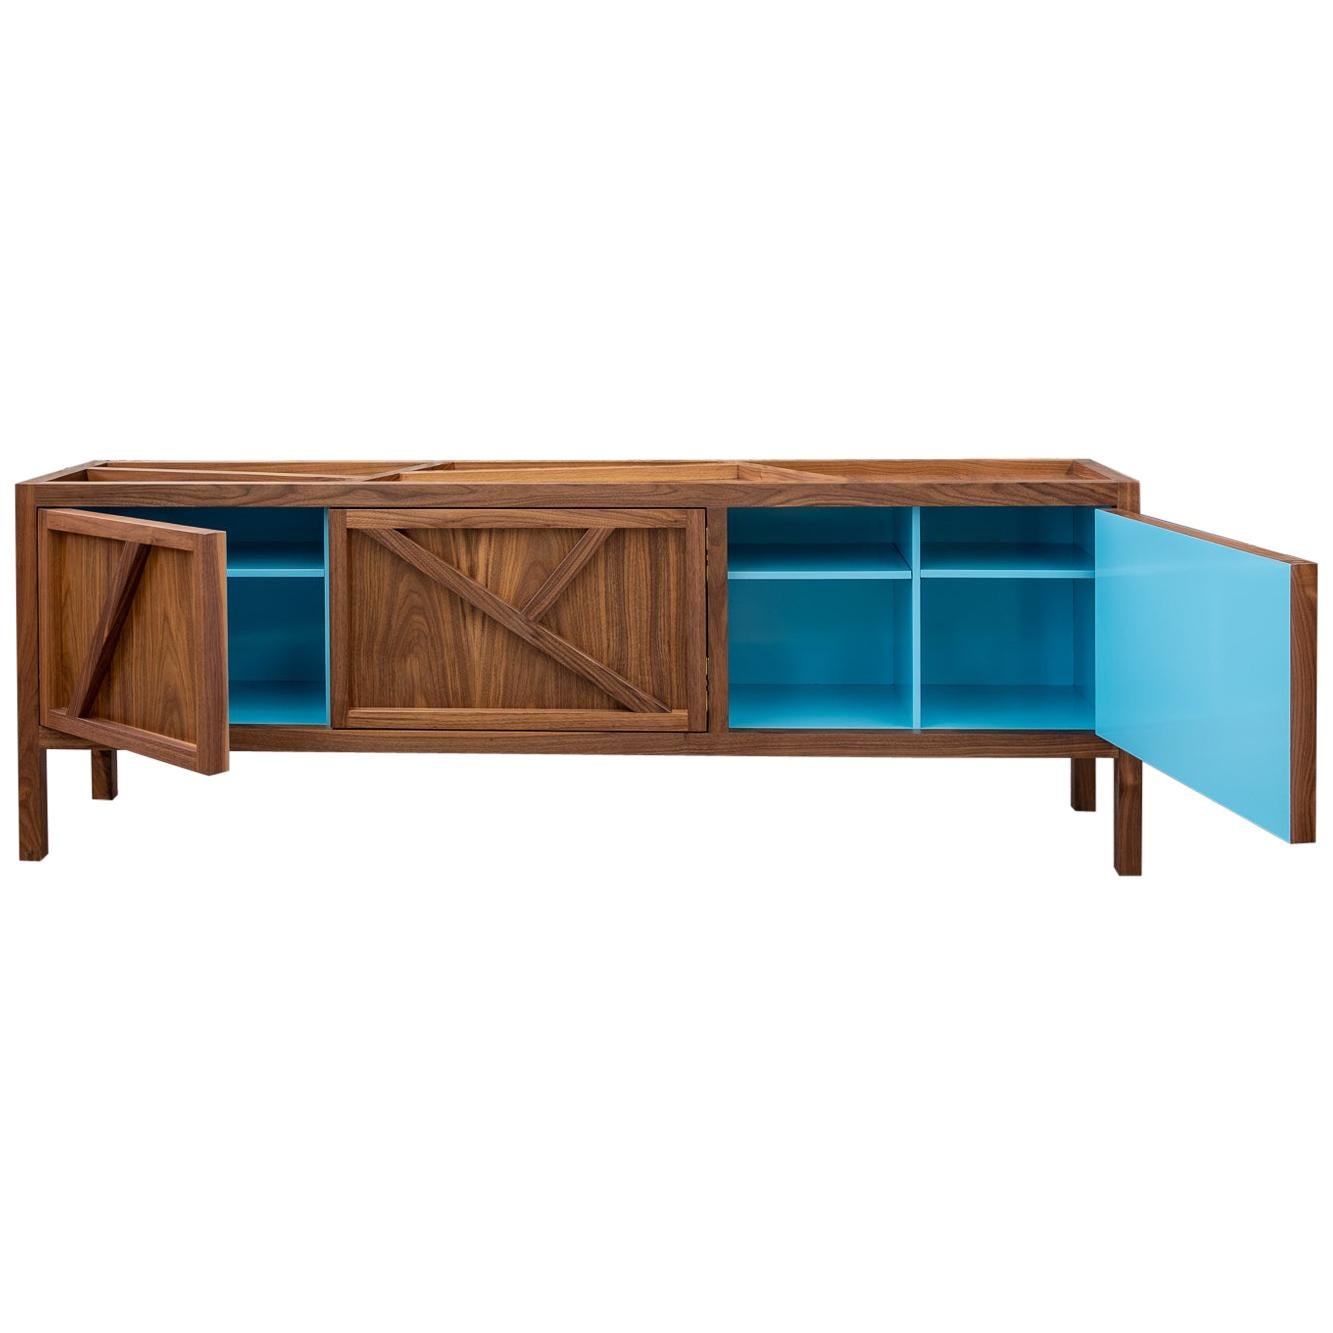 Inside-Out Largo Sideboard TV Cabinet, Credenza, Cerulean Blue Lacquer, Walnut